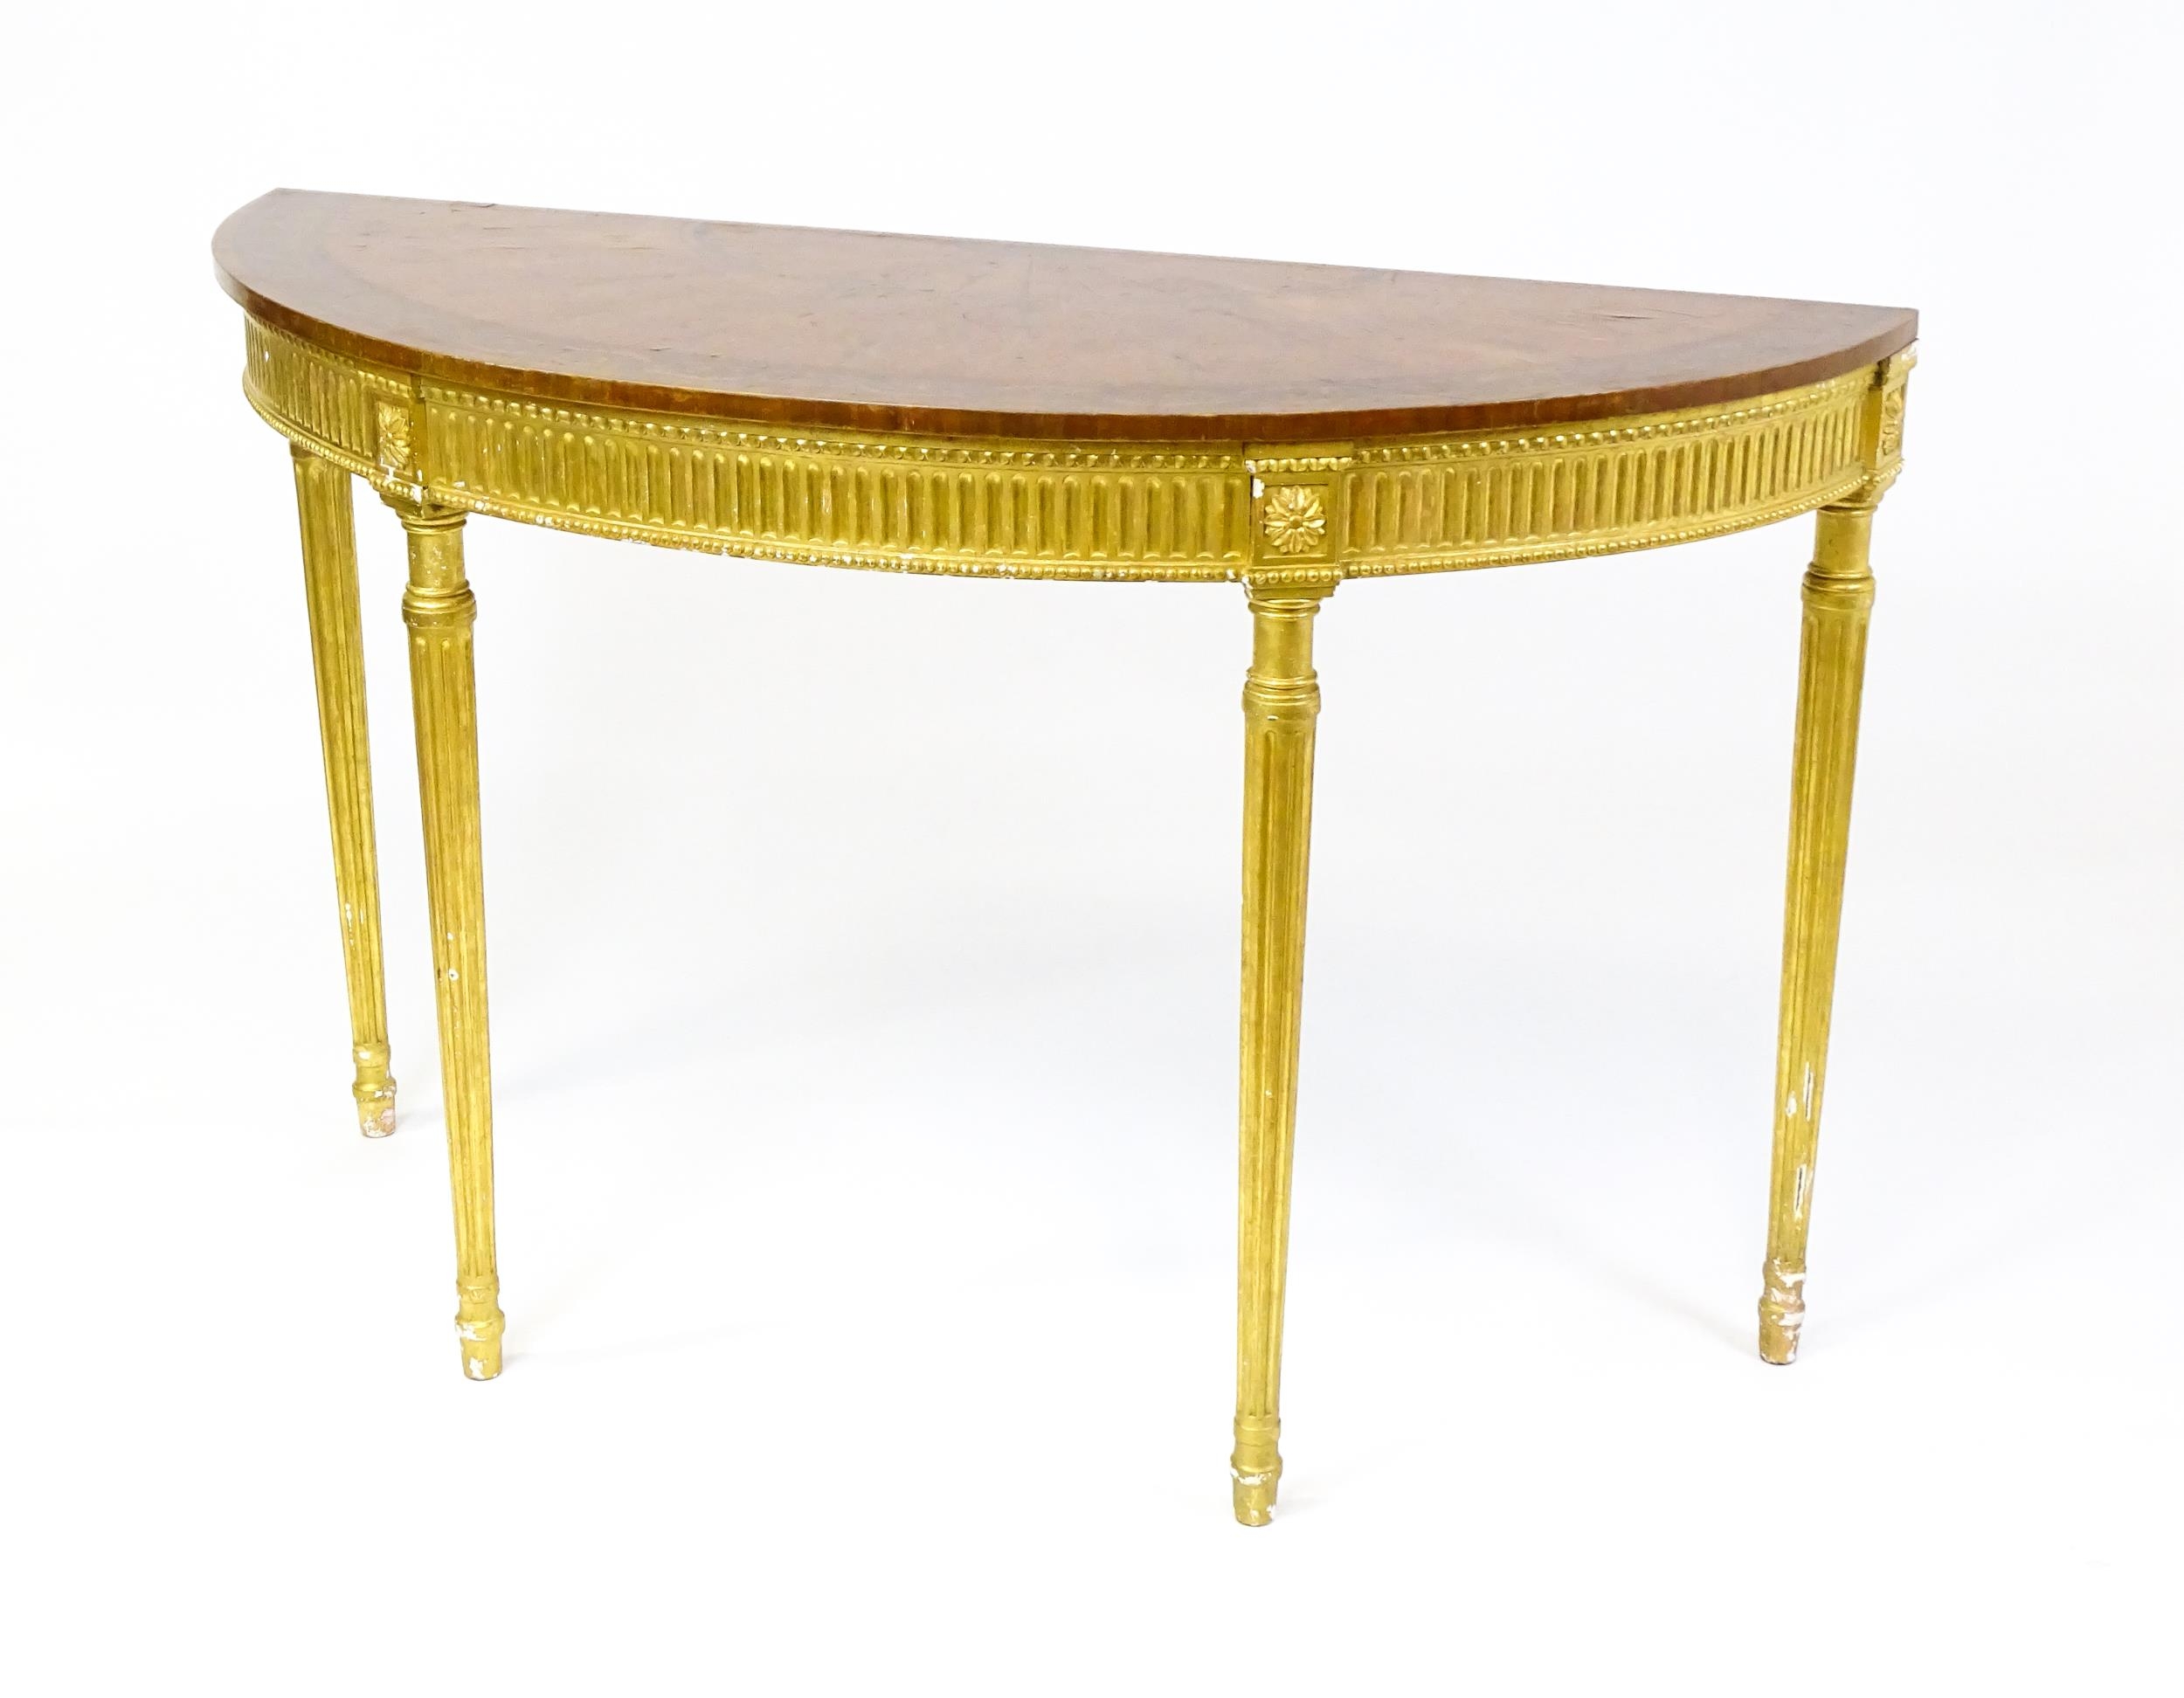 A demi lune console table with a marquetry inlaid top above a fluted frieze and moulded floral - Image 9 of 11